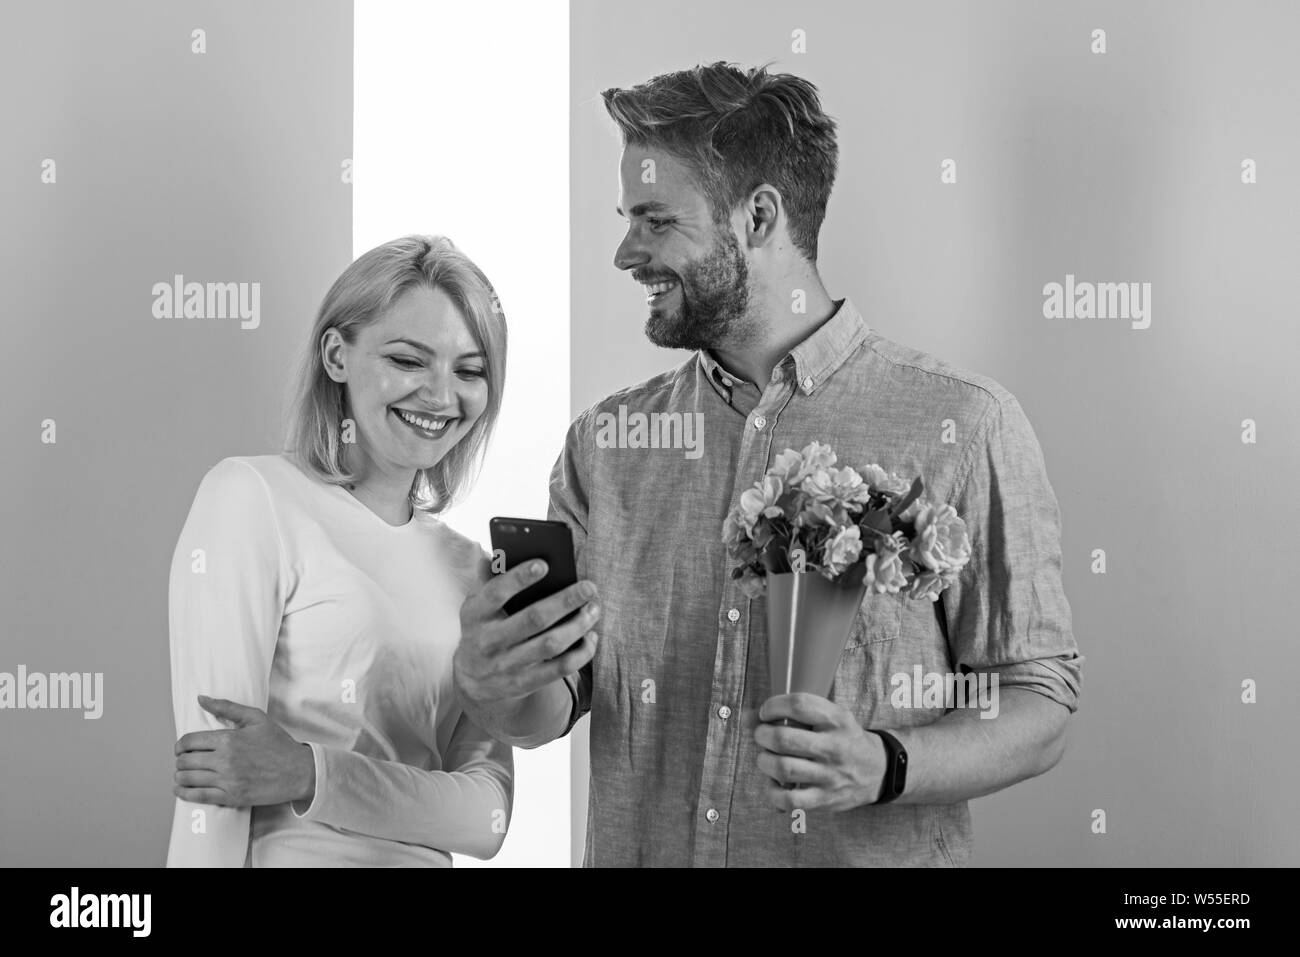 Romantic concept. Couple in love interested by phone. Guy with phone and bouquet of flowers, pastel pink and green background. Man shows photo on smartphone to girl, sweet memories of their relations. Stock Photo